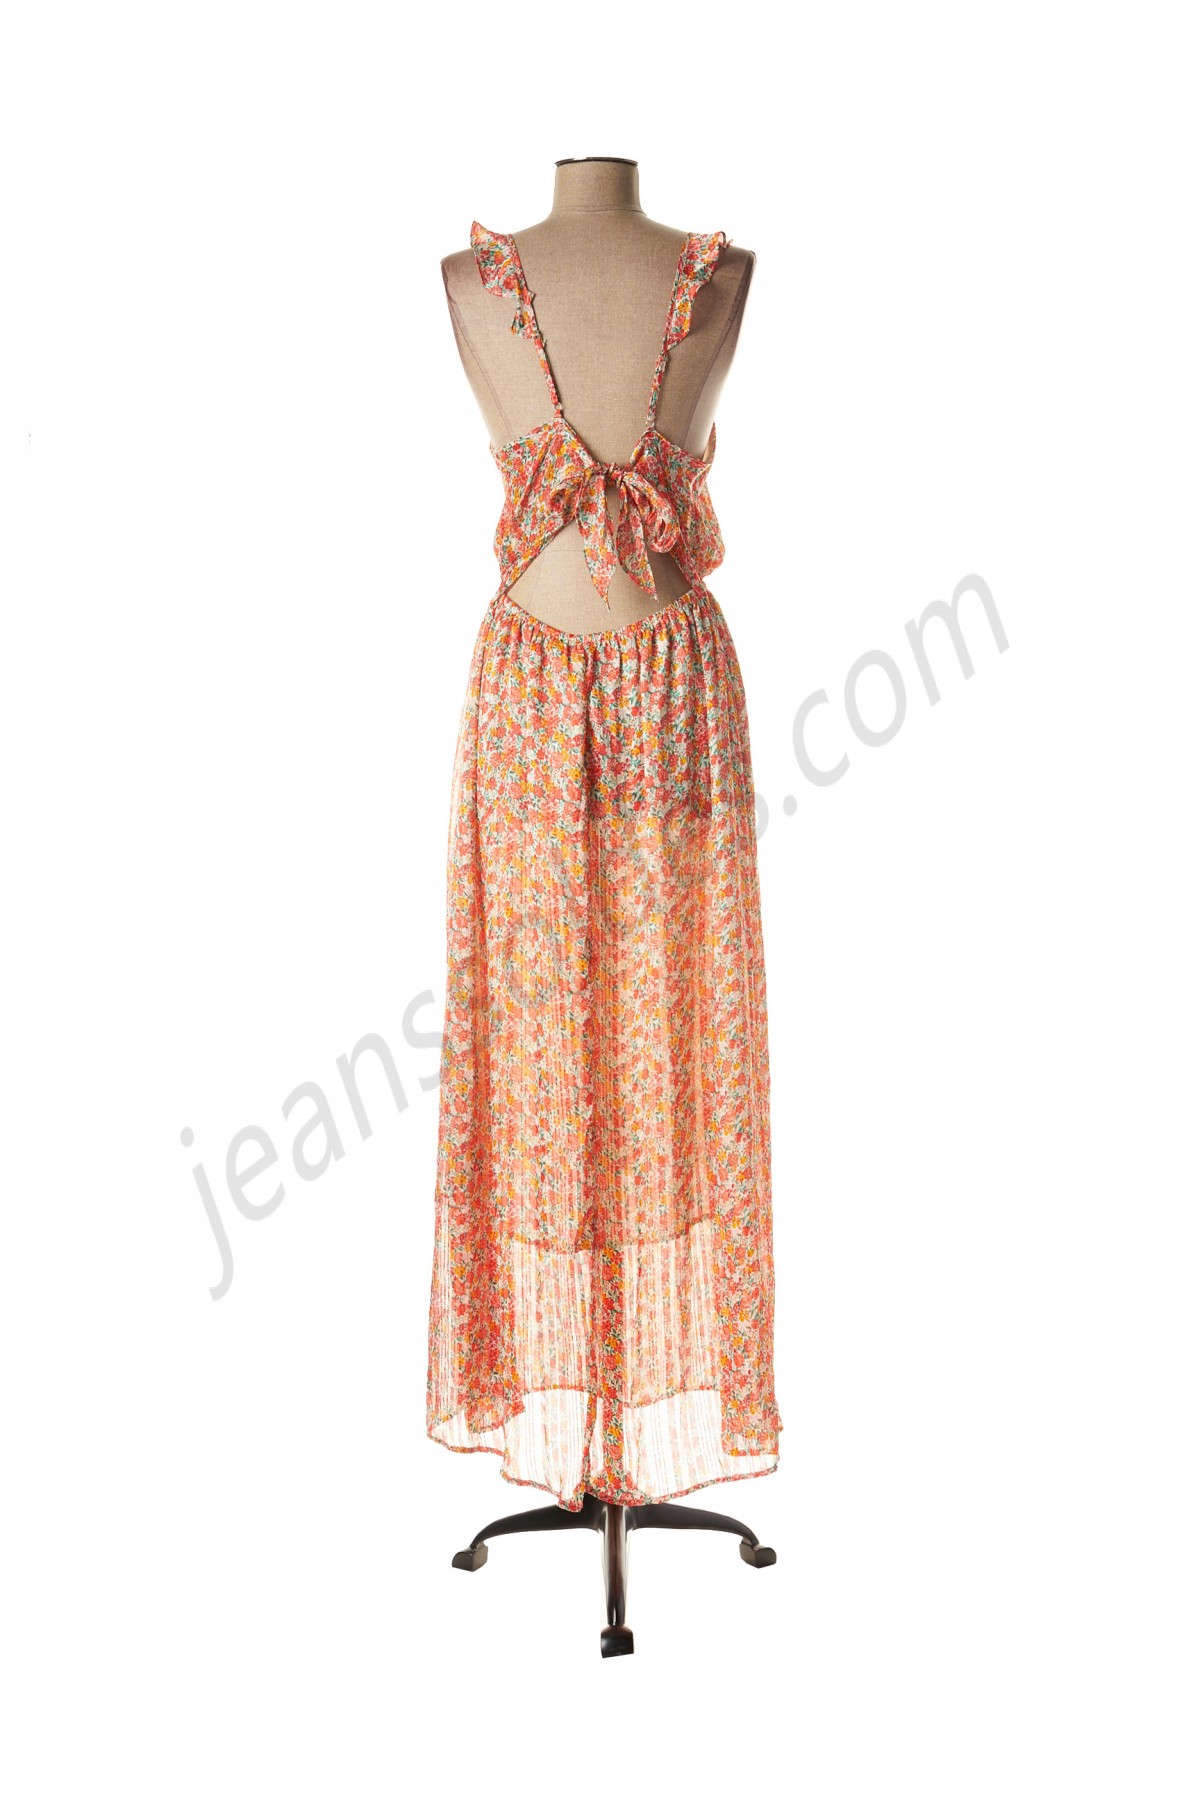 peace and love-Robe longue déstockage - -1